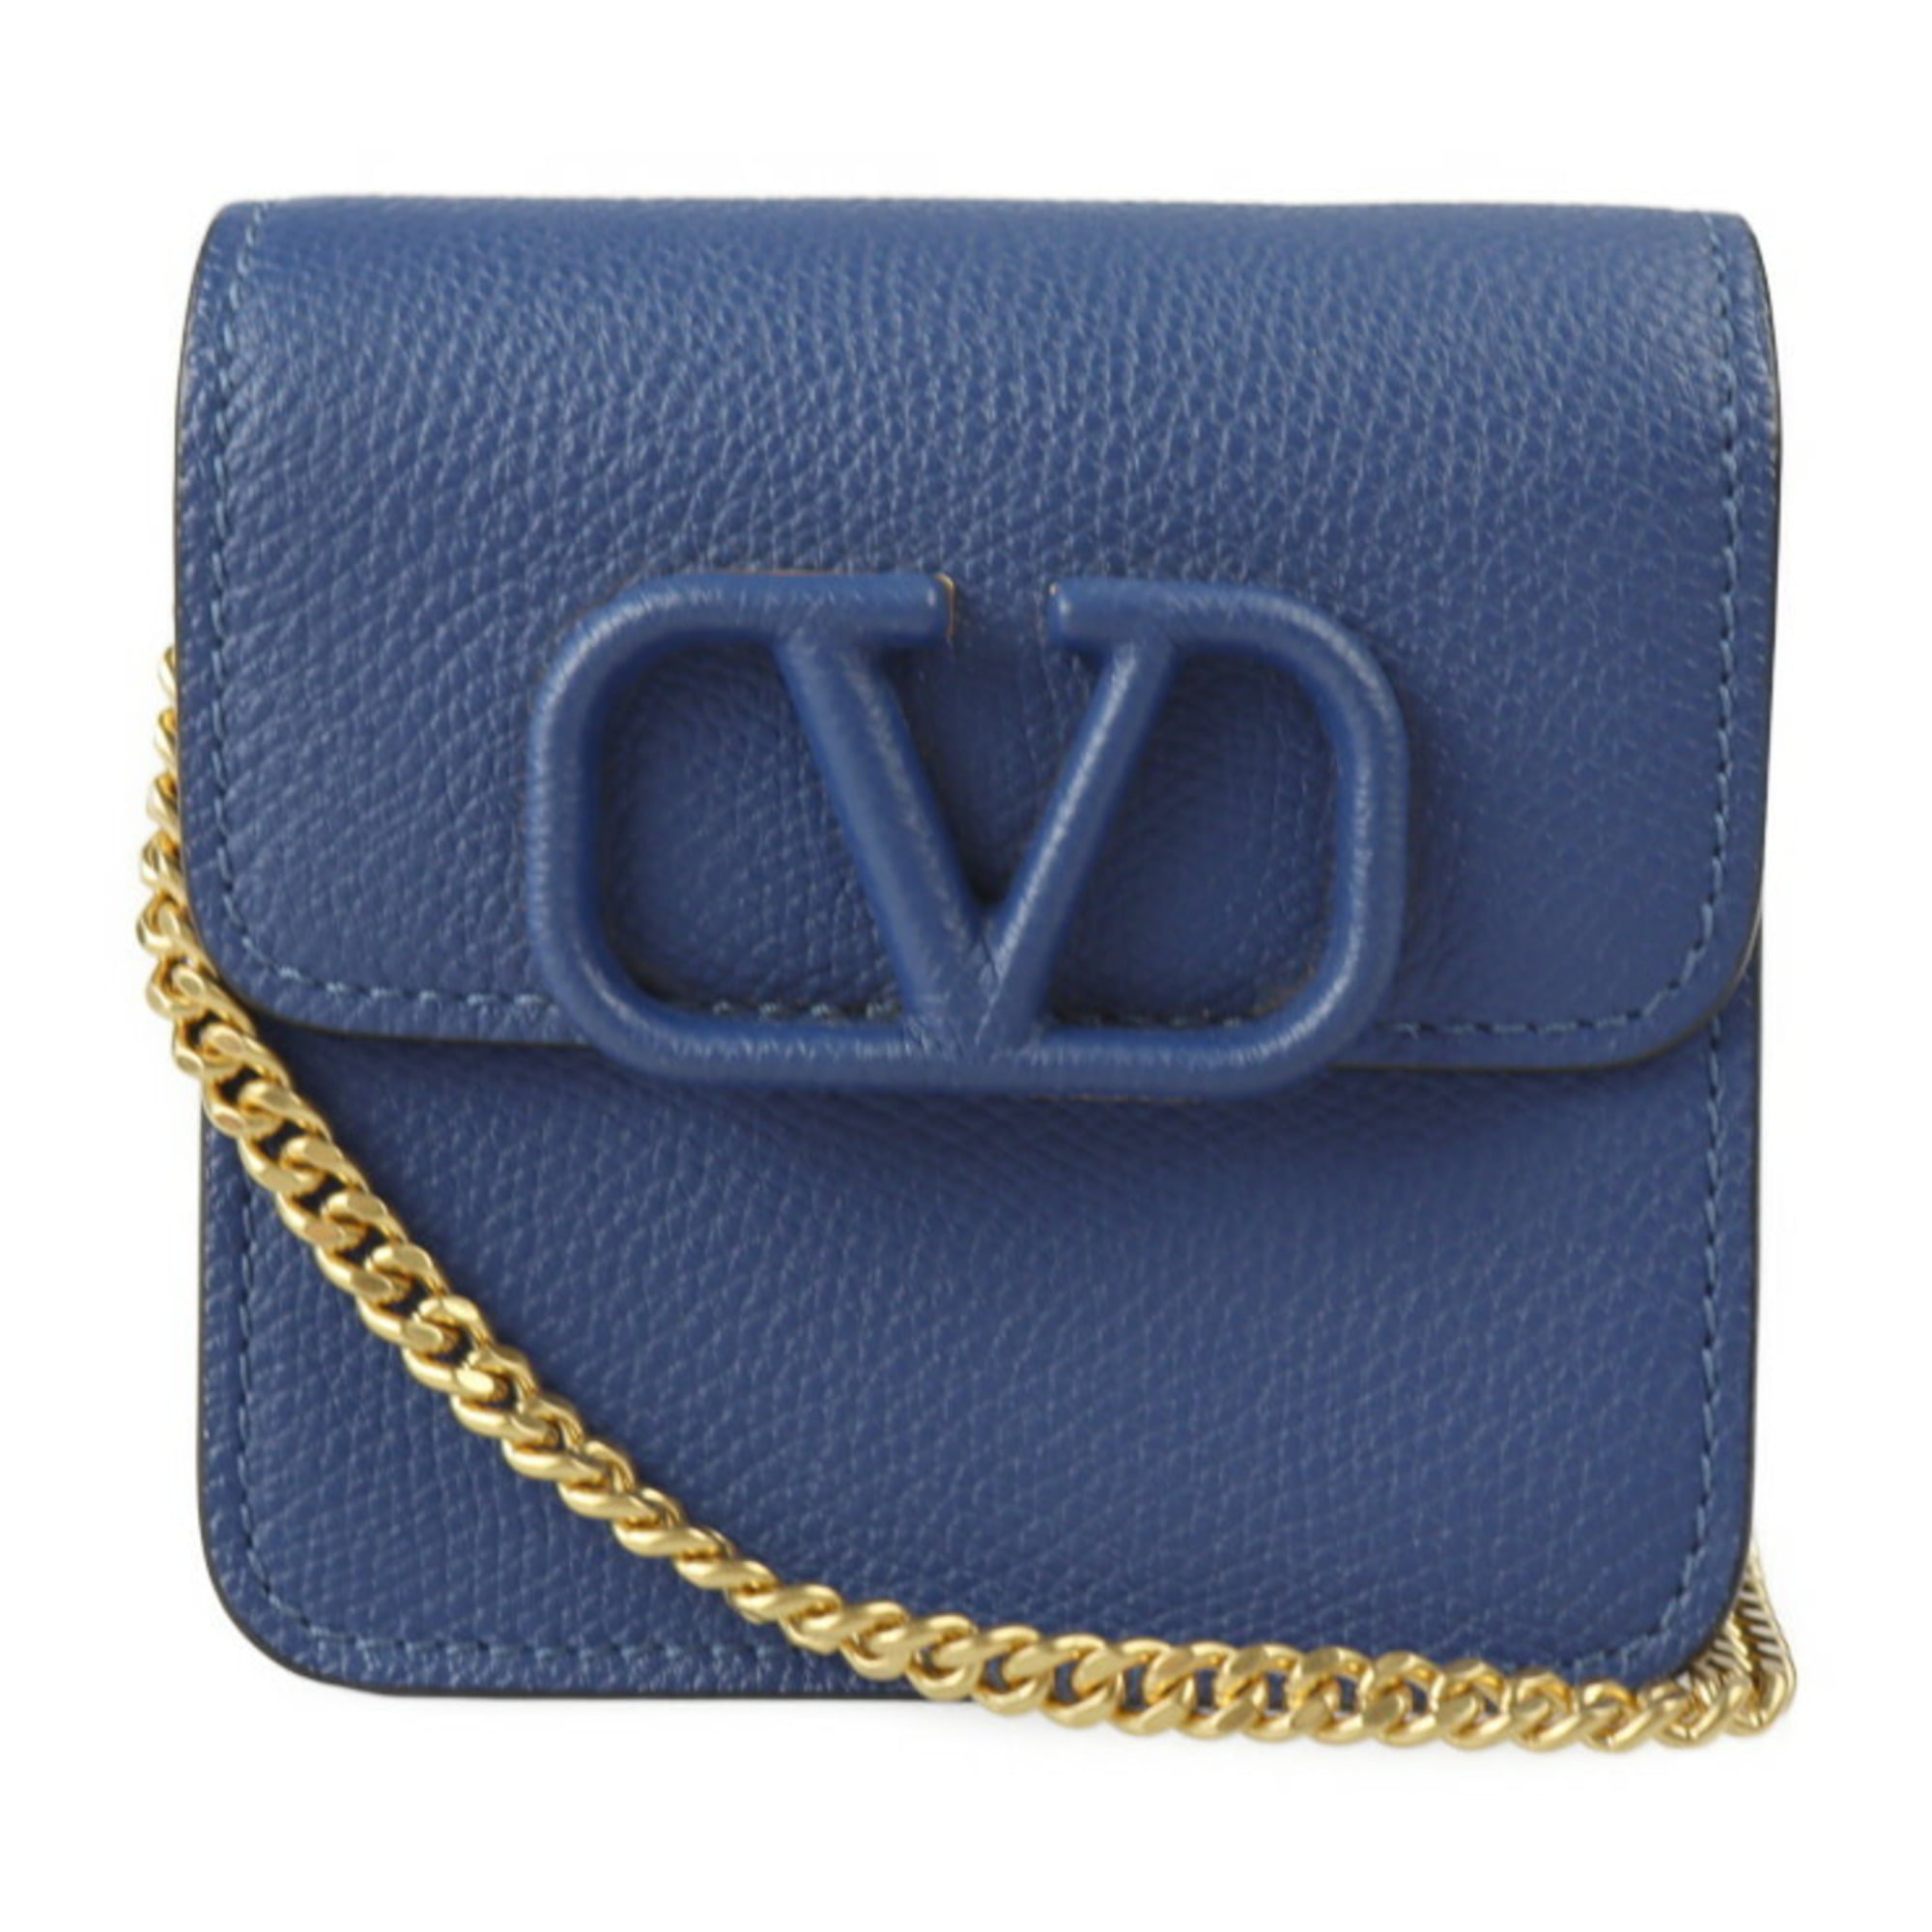 VSLING GRAINY CALFSKIN WALLET WITH CHAIN STRAP